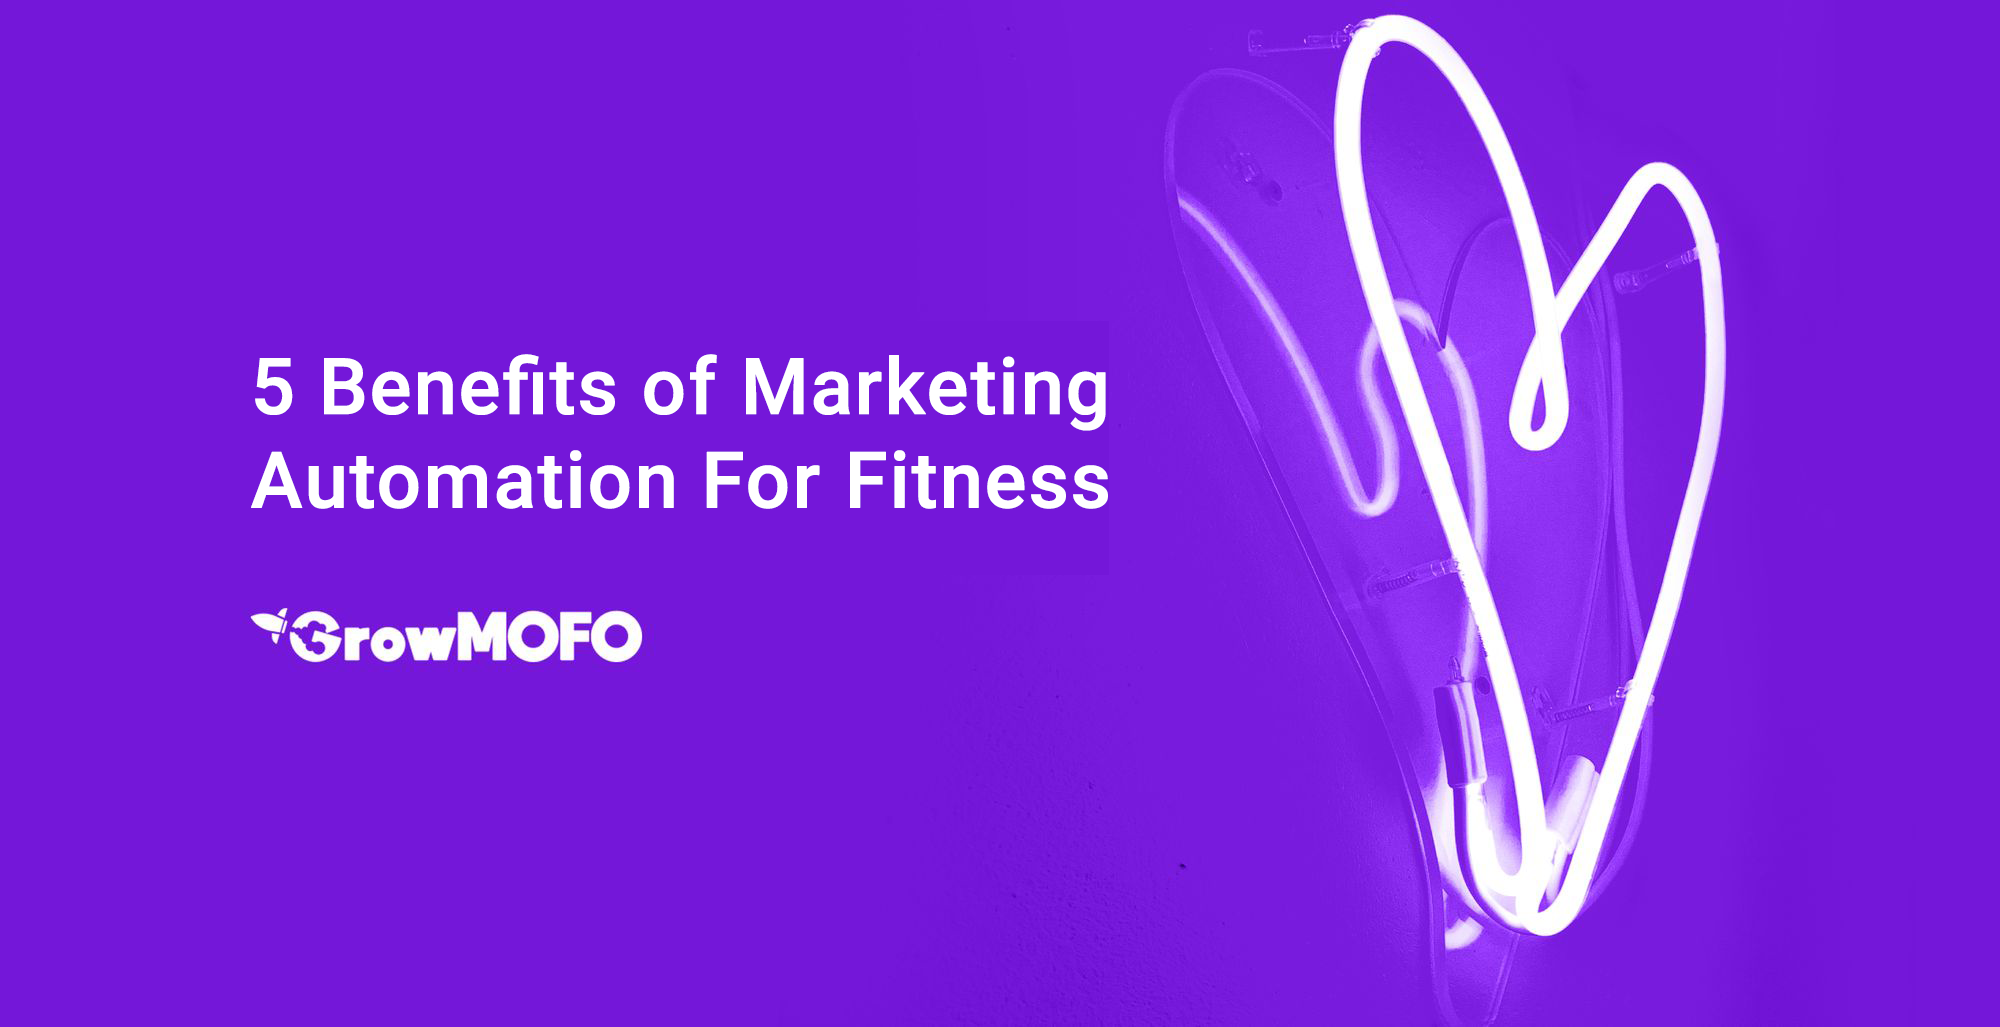 5 Benefits of Marketing Automation For Fitness Industry